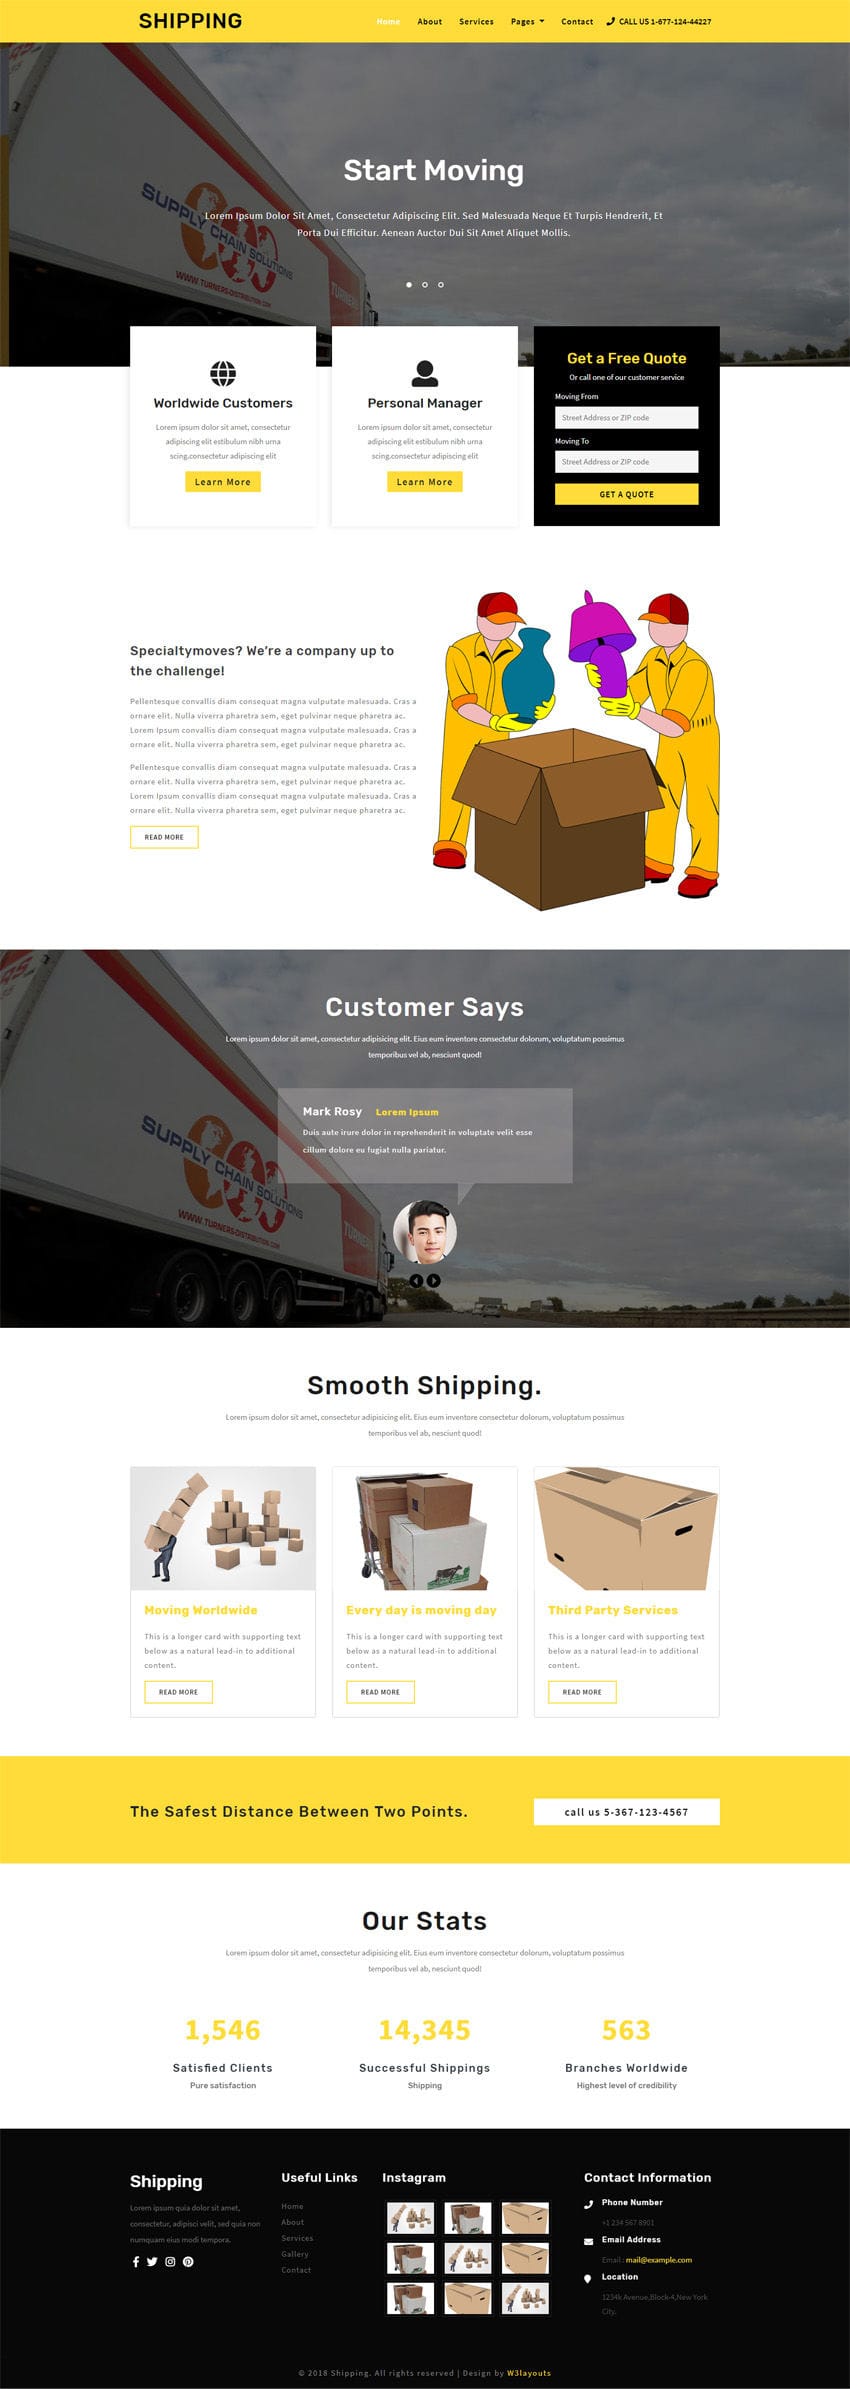 Shipping Transportation Category Bootstrap Responsive Web Template.It is entirely built in Bootstrap framework, HTML5, CSS3 and Jquery.